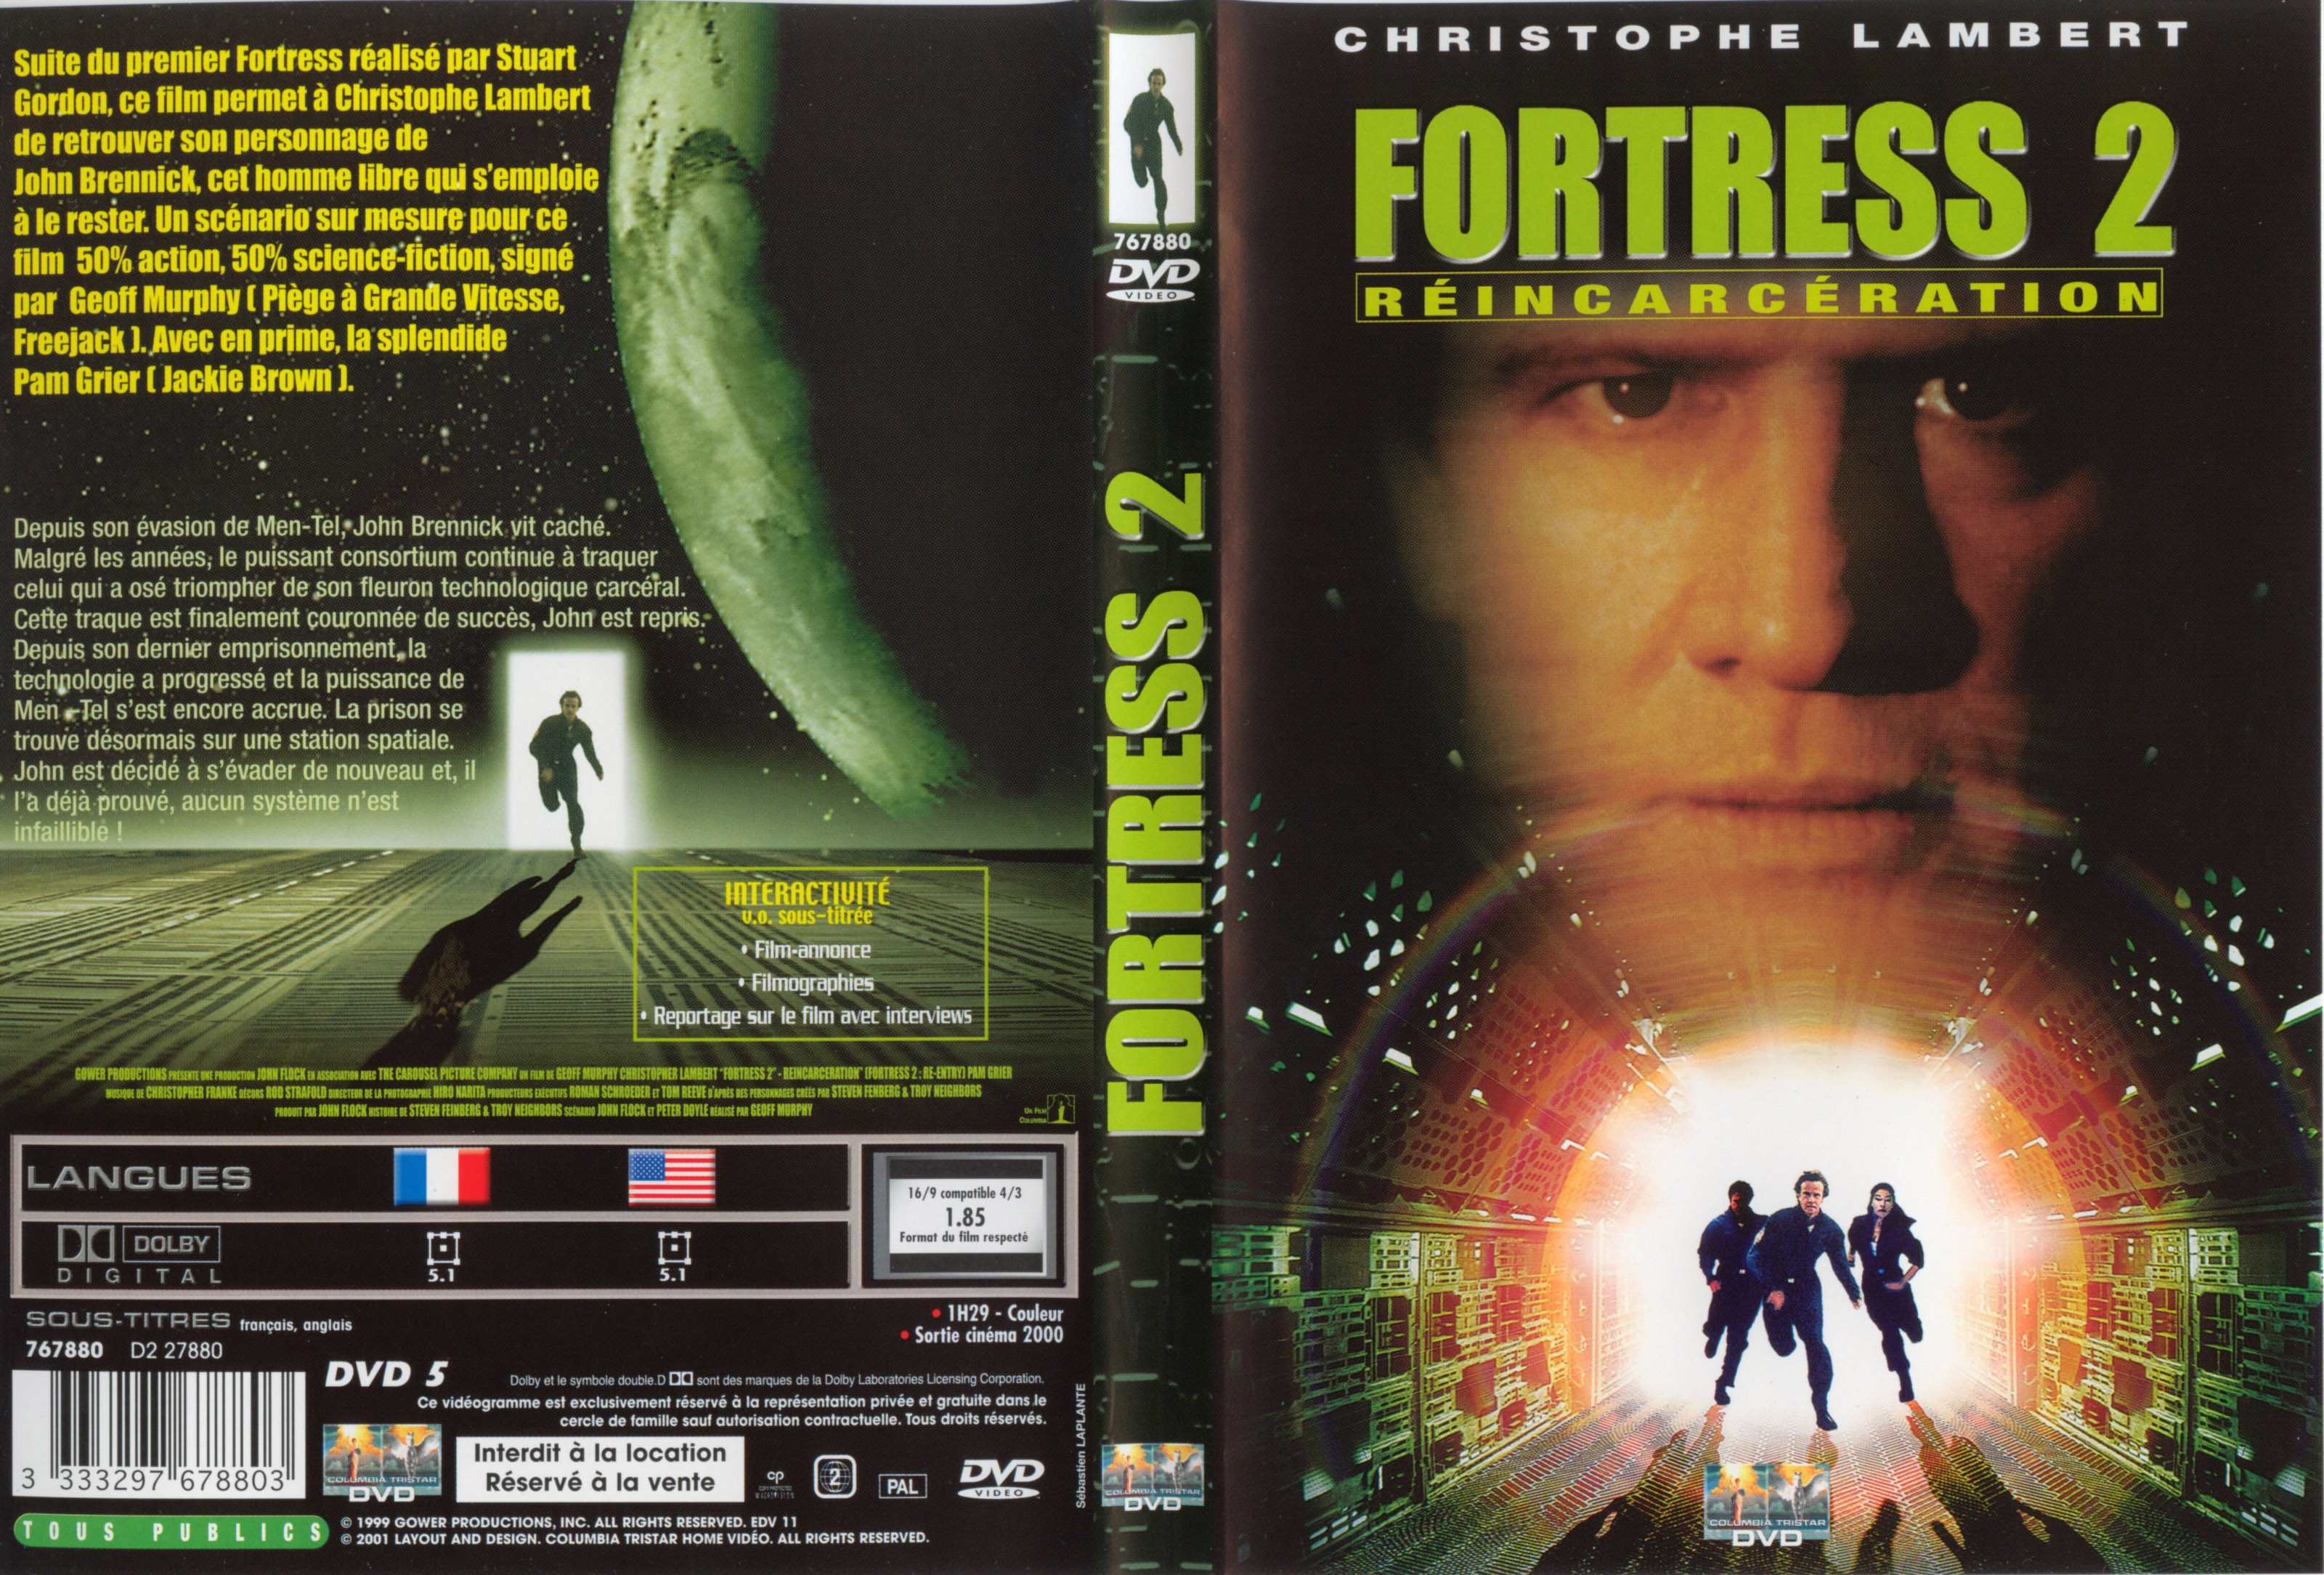 Jaquette DVD Fortress 2